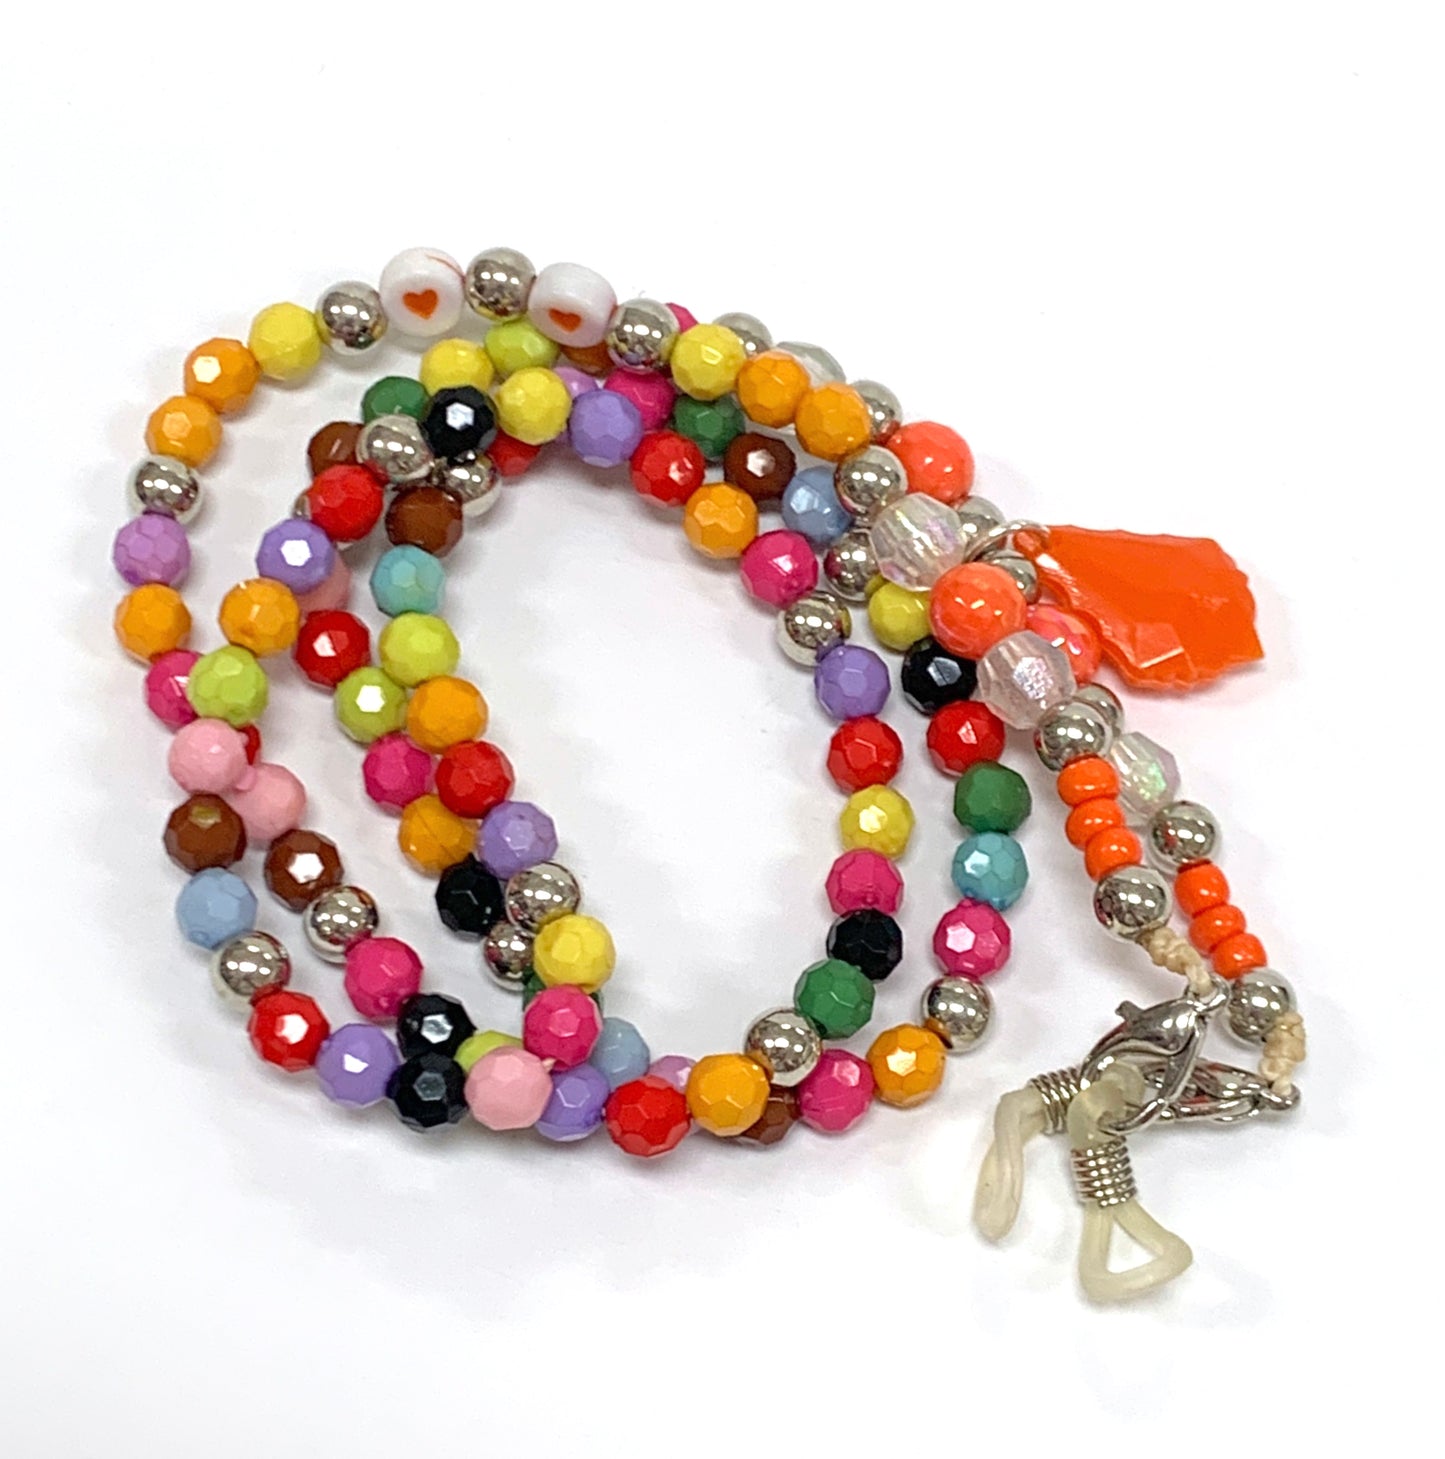 Necklace Chain Lanyard of Assorted Colors